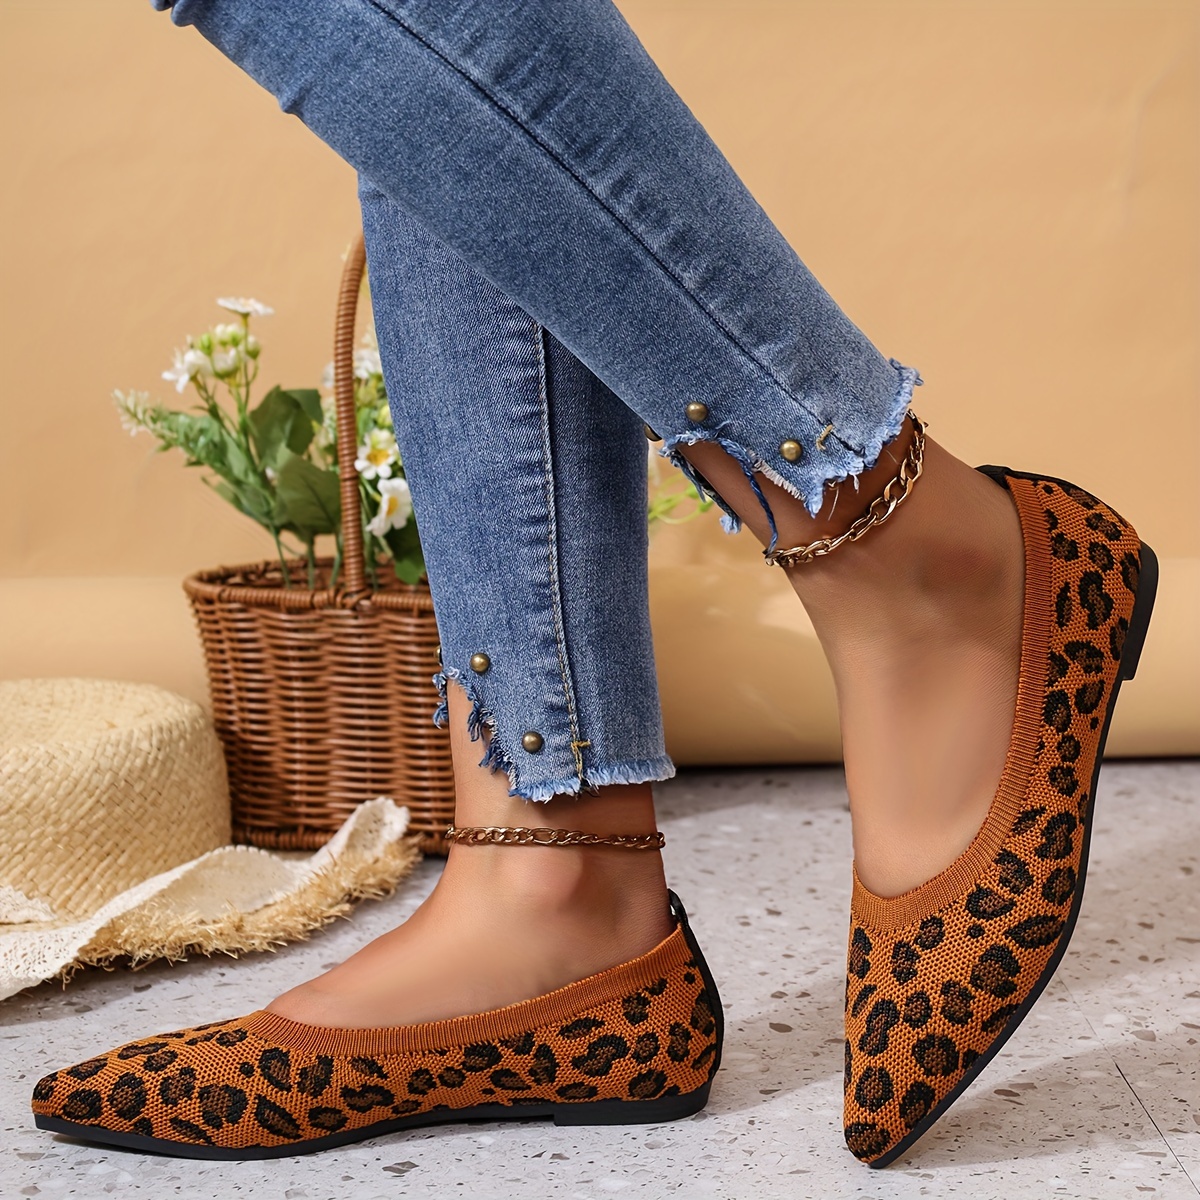 Women's Leopard Print Flat Shoes, Fashionable Pointed Toe Soft Sole Slip On  Shoes, Stylish Ballet Flats